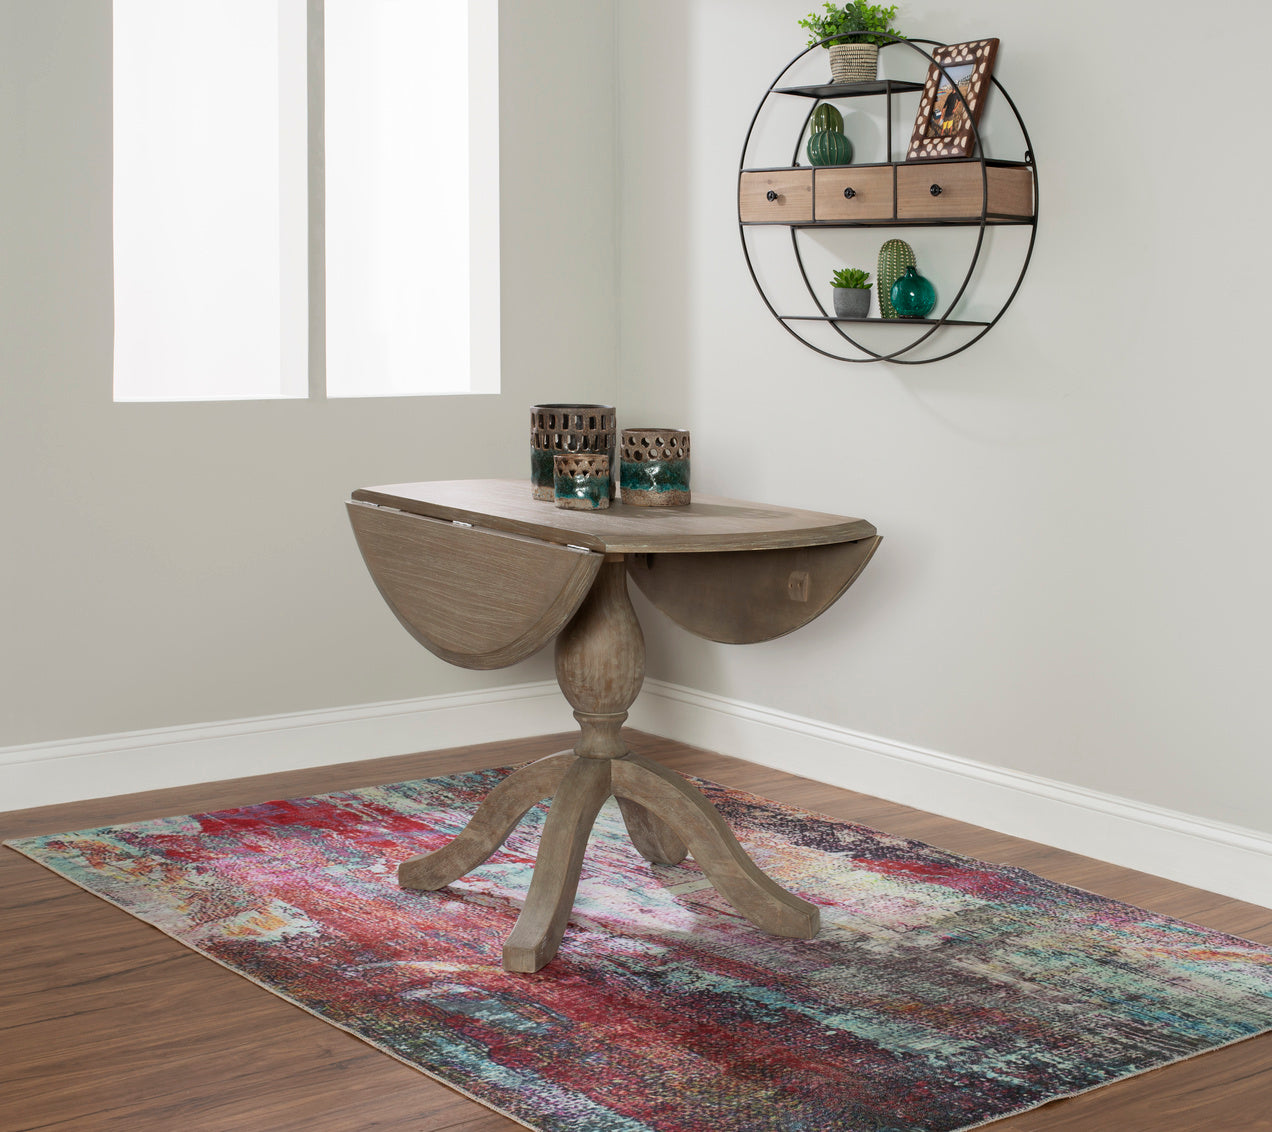 Torino Gray Round Drop-Leaf Dining Table